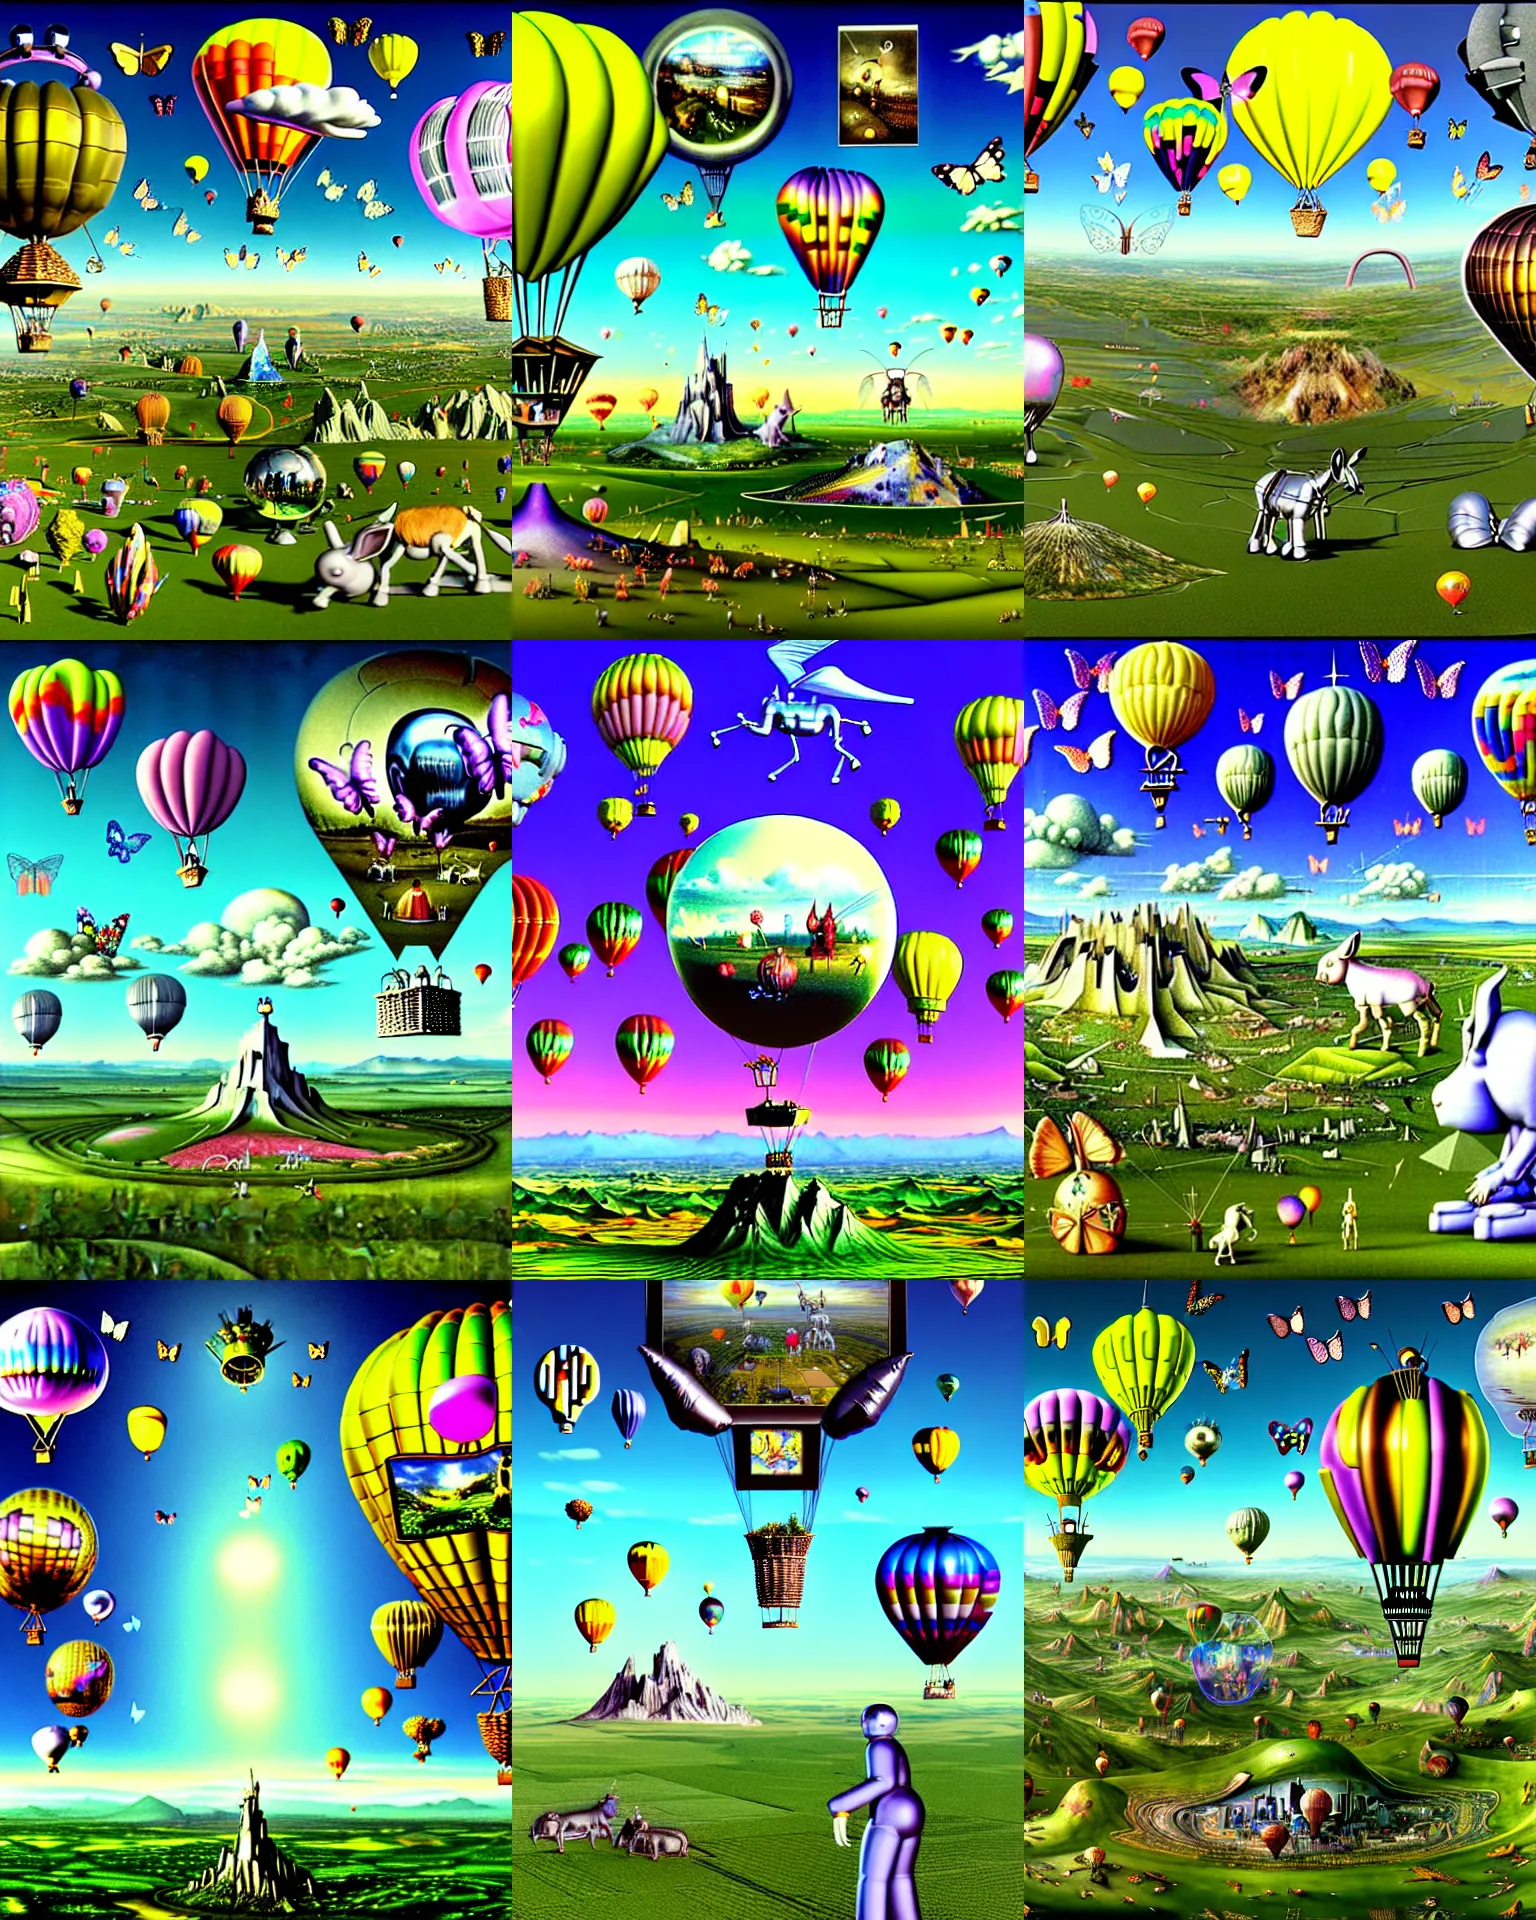 Prompt: 3 d render of cybernetic hieronymus bosch landscape with cyborg balloon donkey with angel wings and hot air balloons against a psychedelic surreal background with 3 d butterflies and 3 d flowers n the style of 1 9 9 0's cg graphics, lsd dream emulator psx, 3 d rendered y 2 k aesthetic by ichiro tanida, 3 do magazine, wide shot